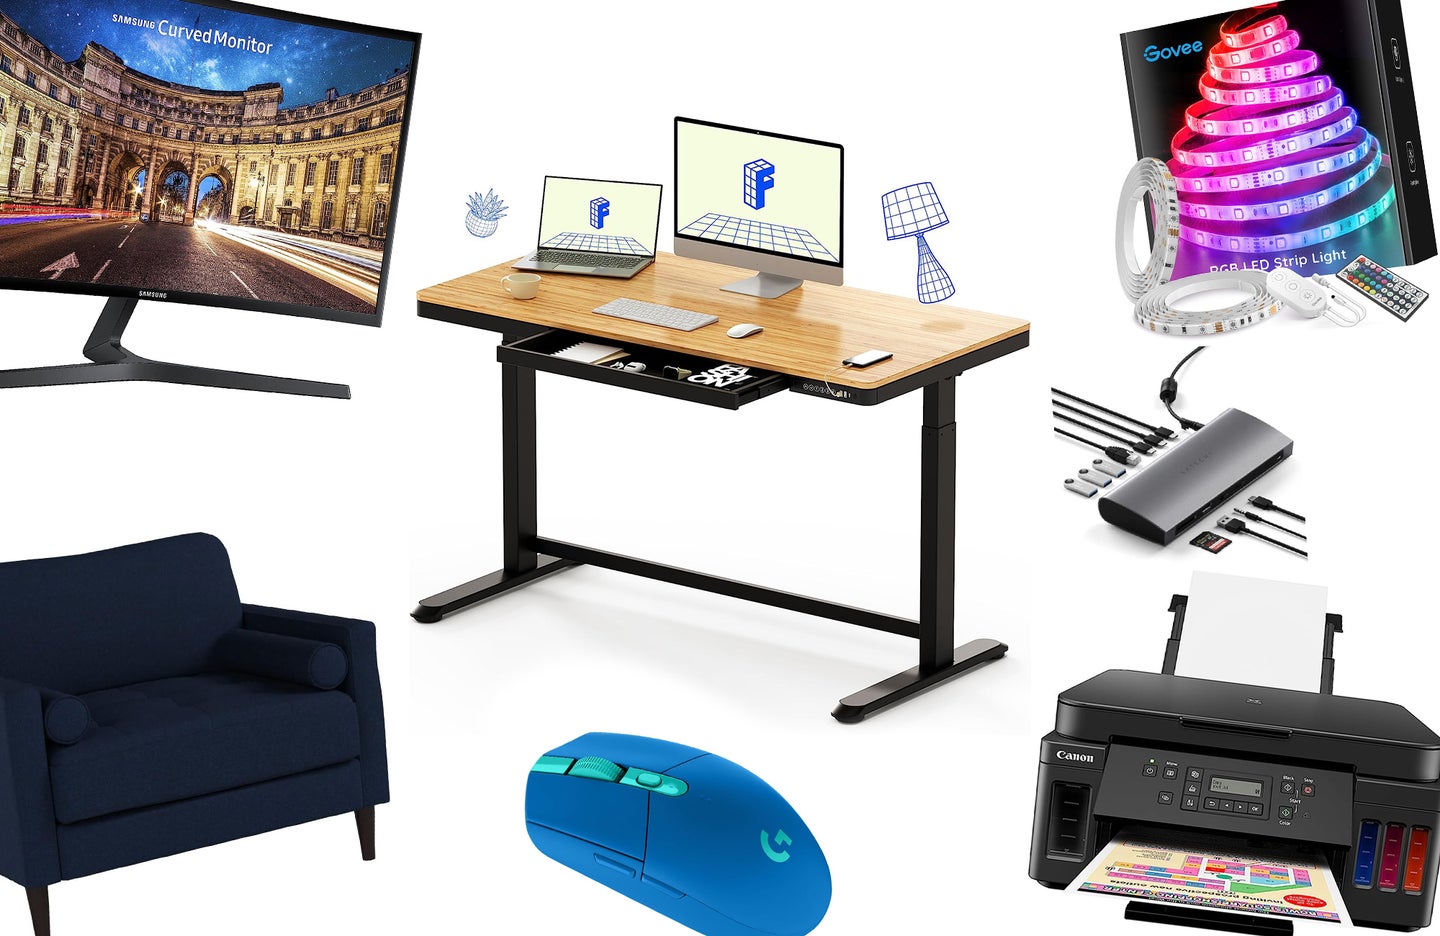 A random assortment of office themed items against a white background